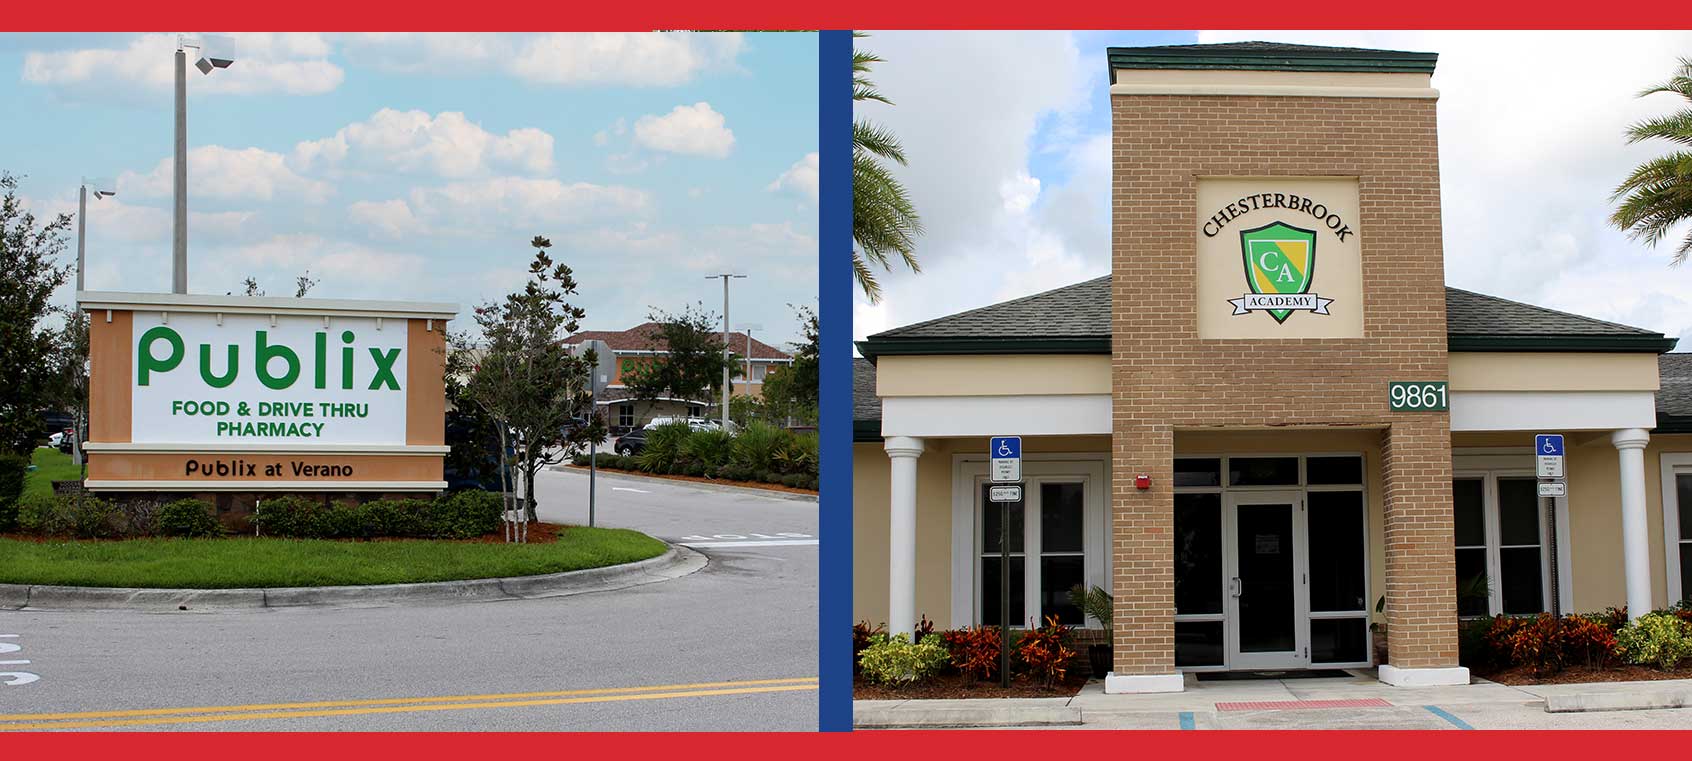 Shopping,Schools,Services near Central Park St. Lucie Florida